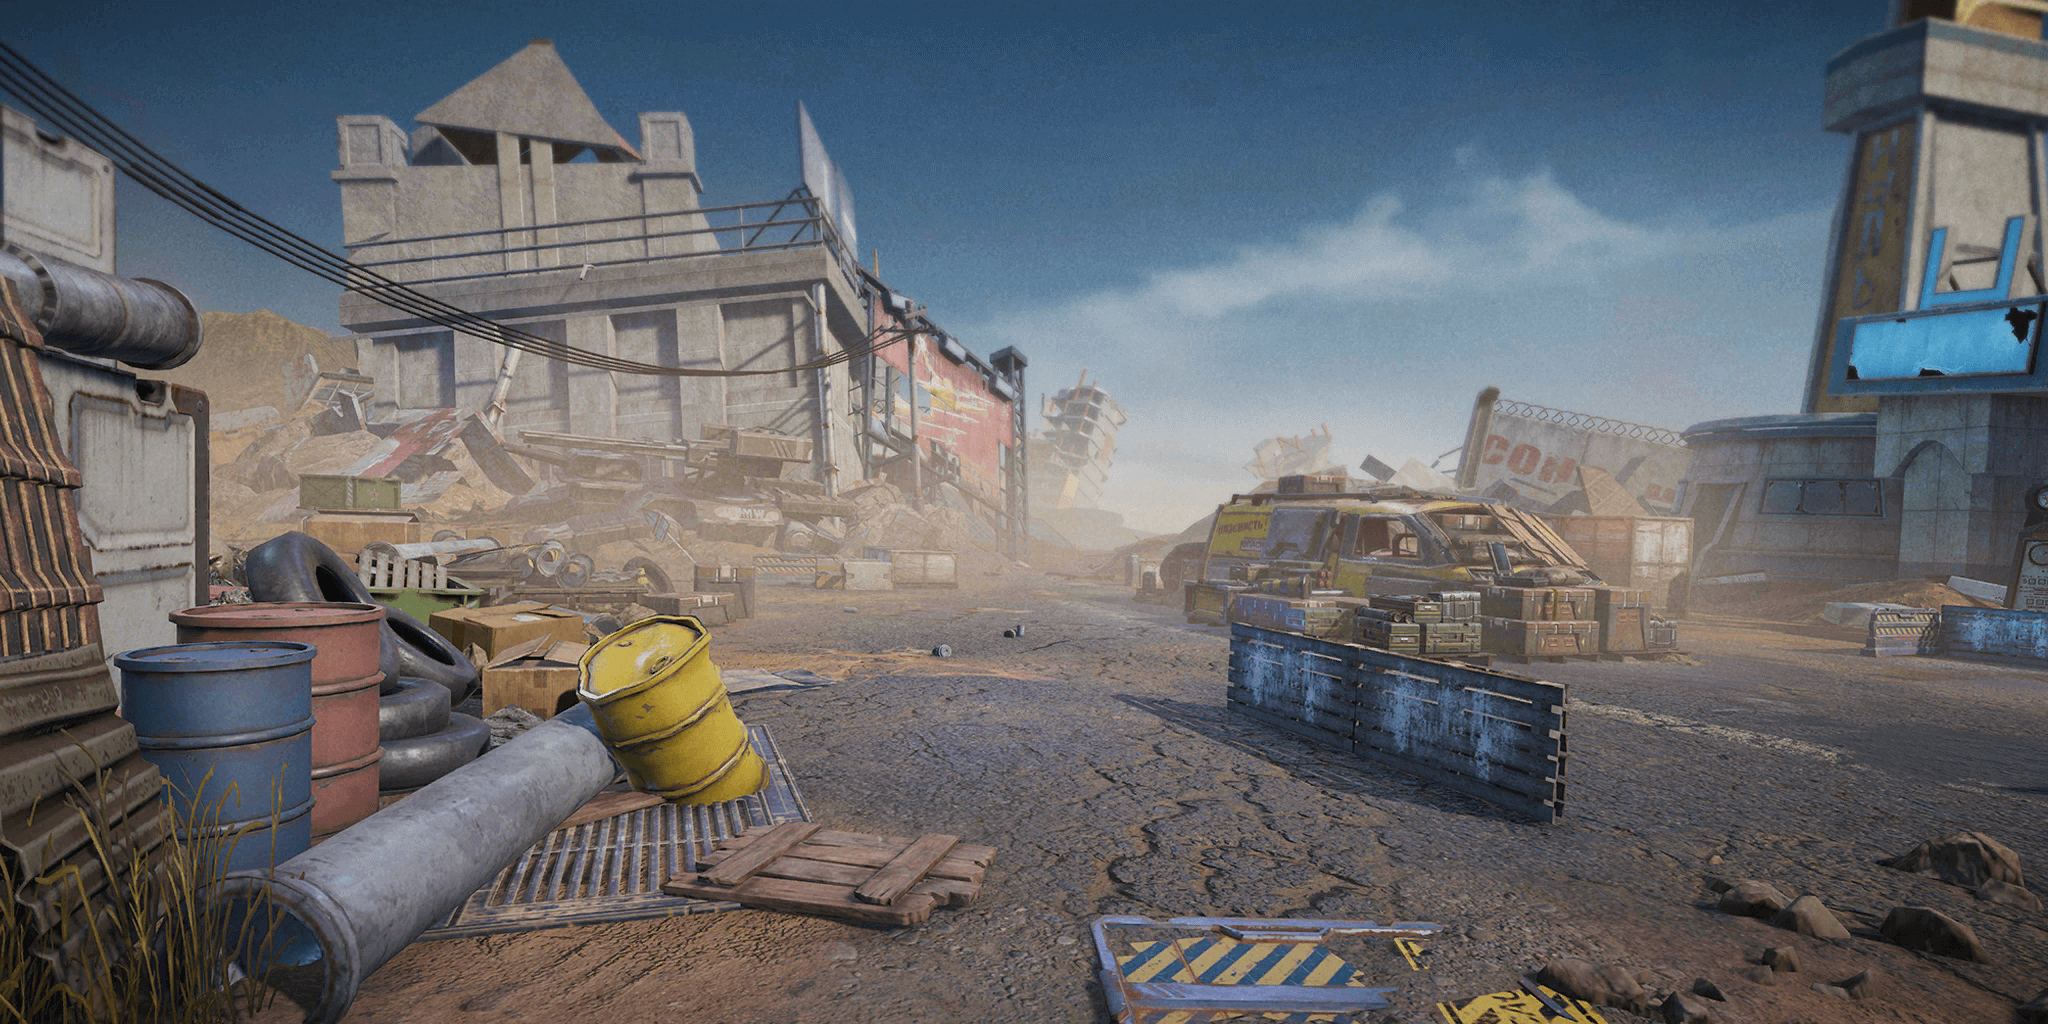 An unknown town left deserted in the Yellow Zone wastes.